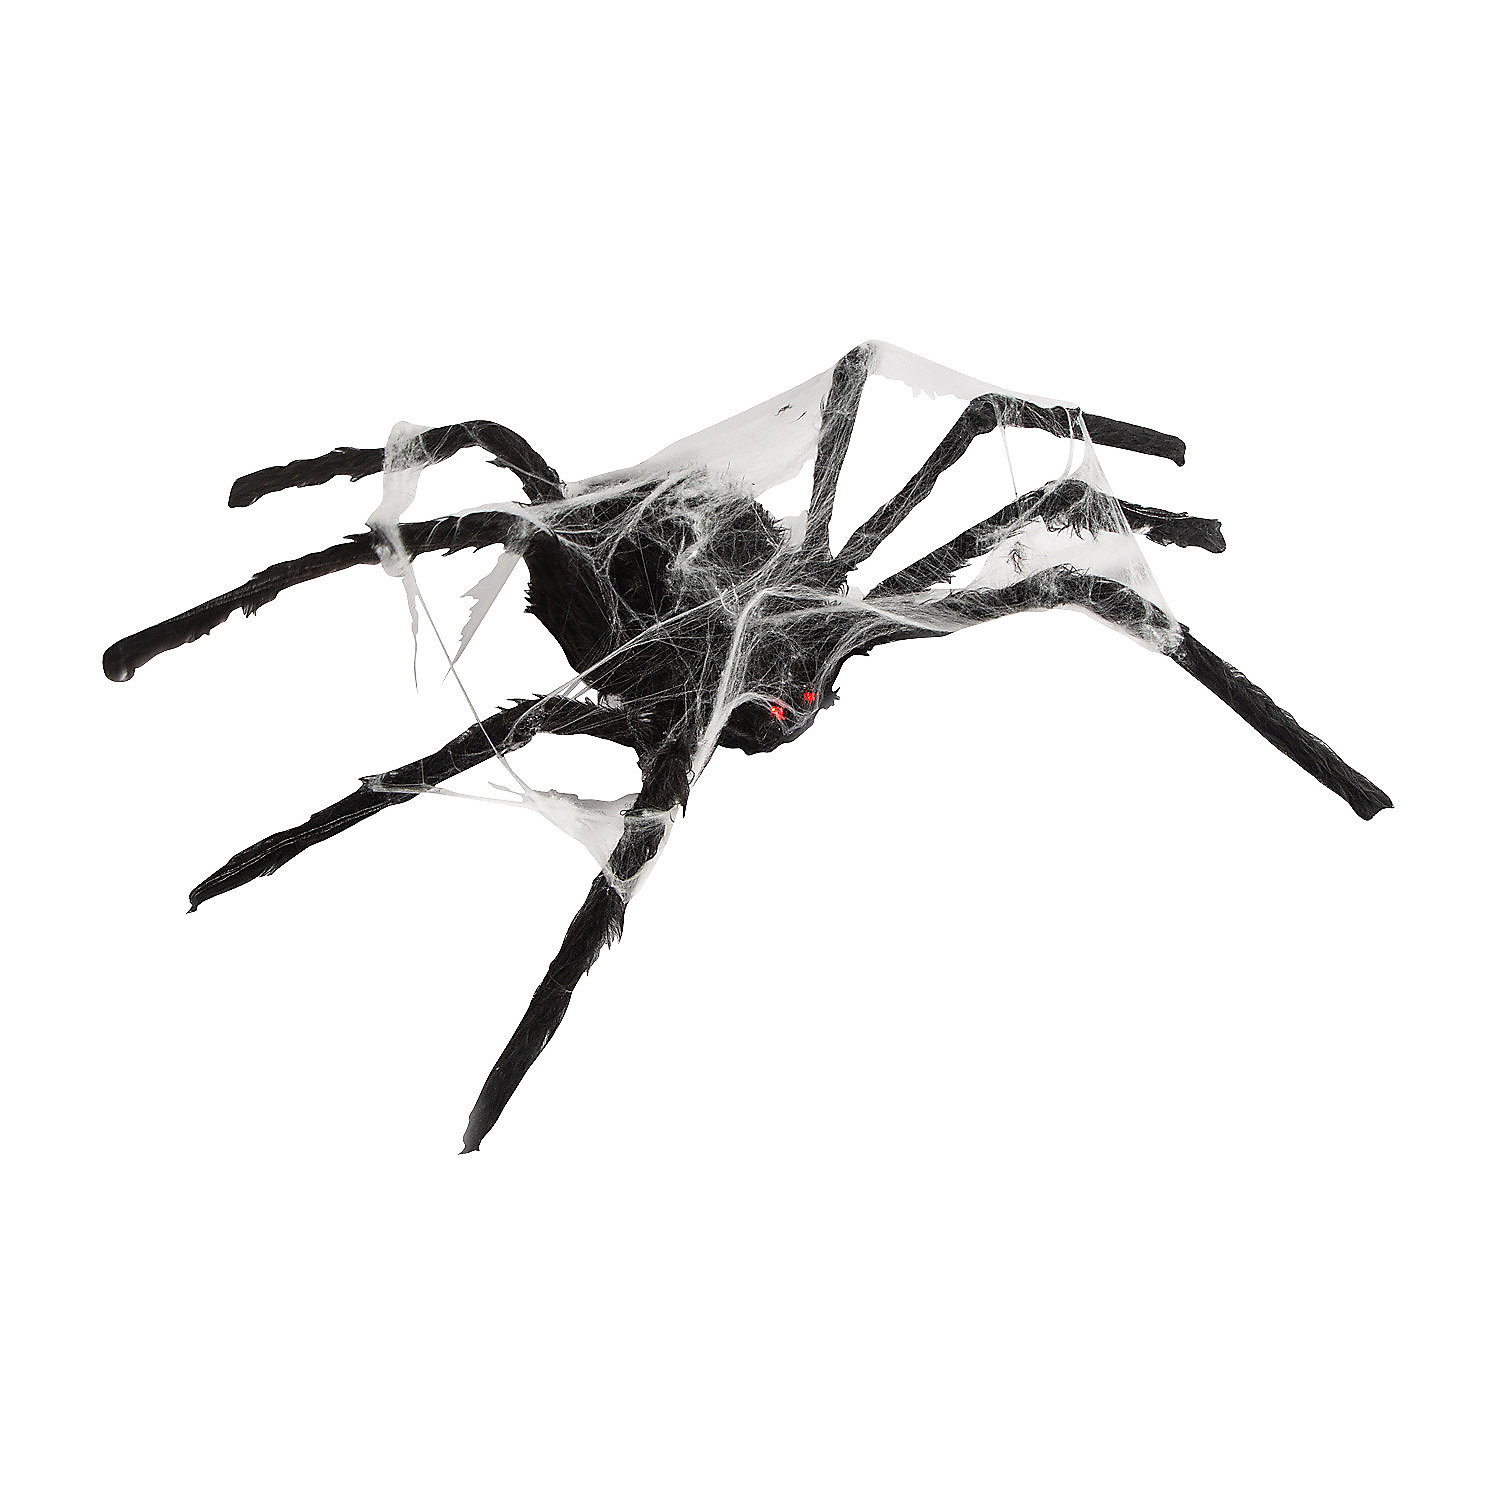 The Holiday Aisle® Animated Walking Spider with Web Figurine | Wayfair